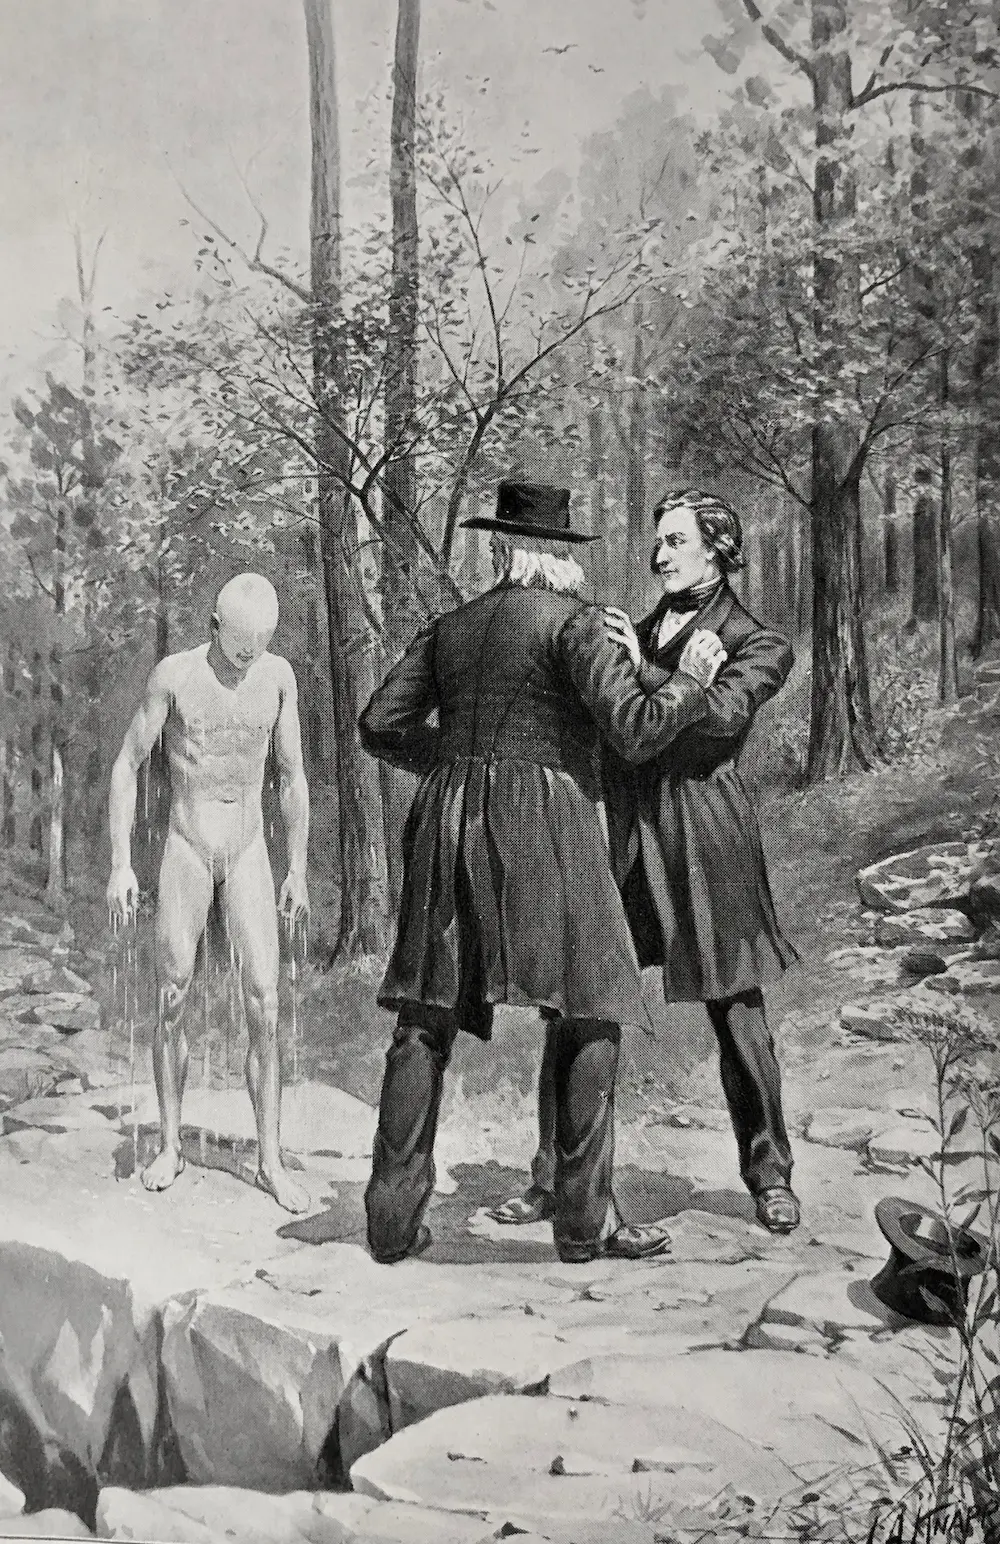 Black and white illustration of an eyeless hairless man confronting two 19th century gentlemen